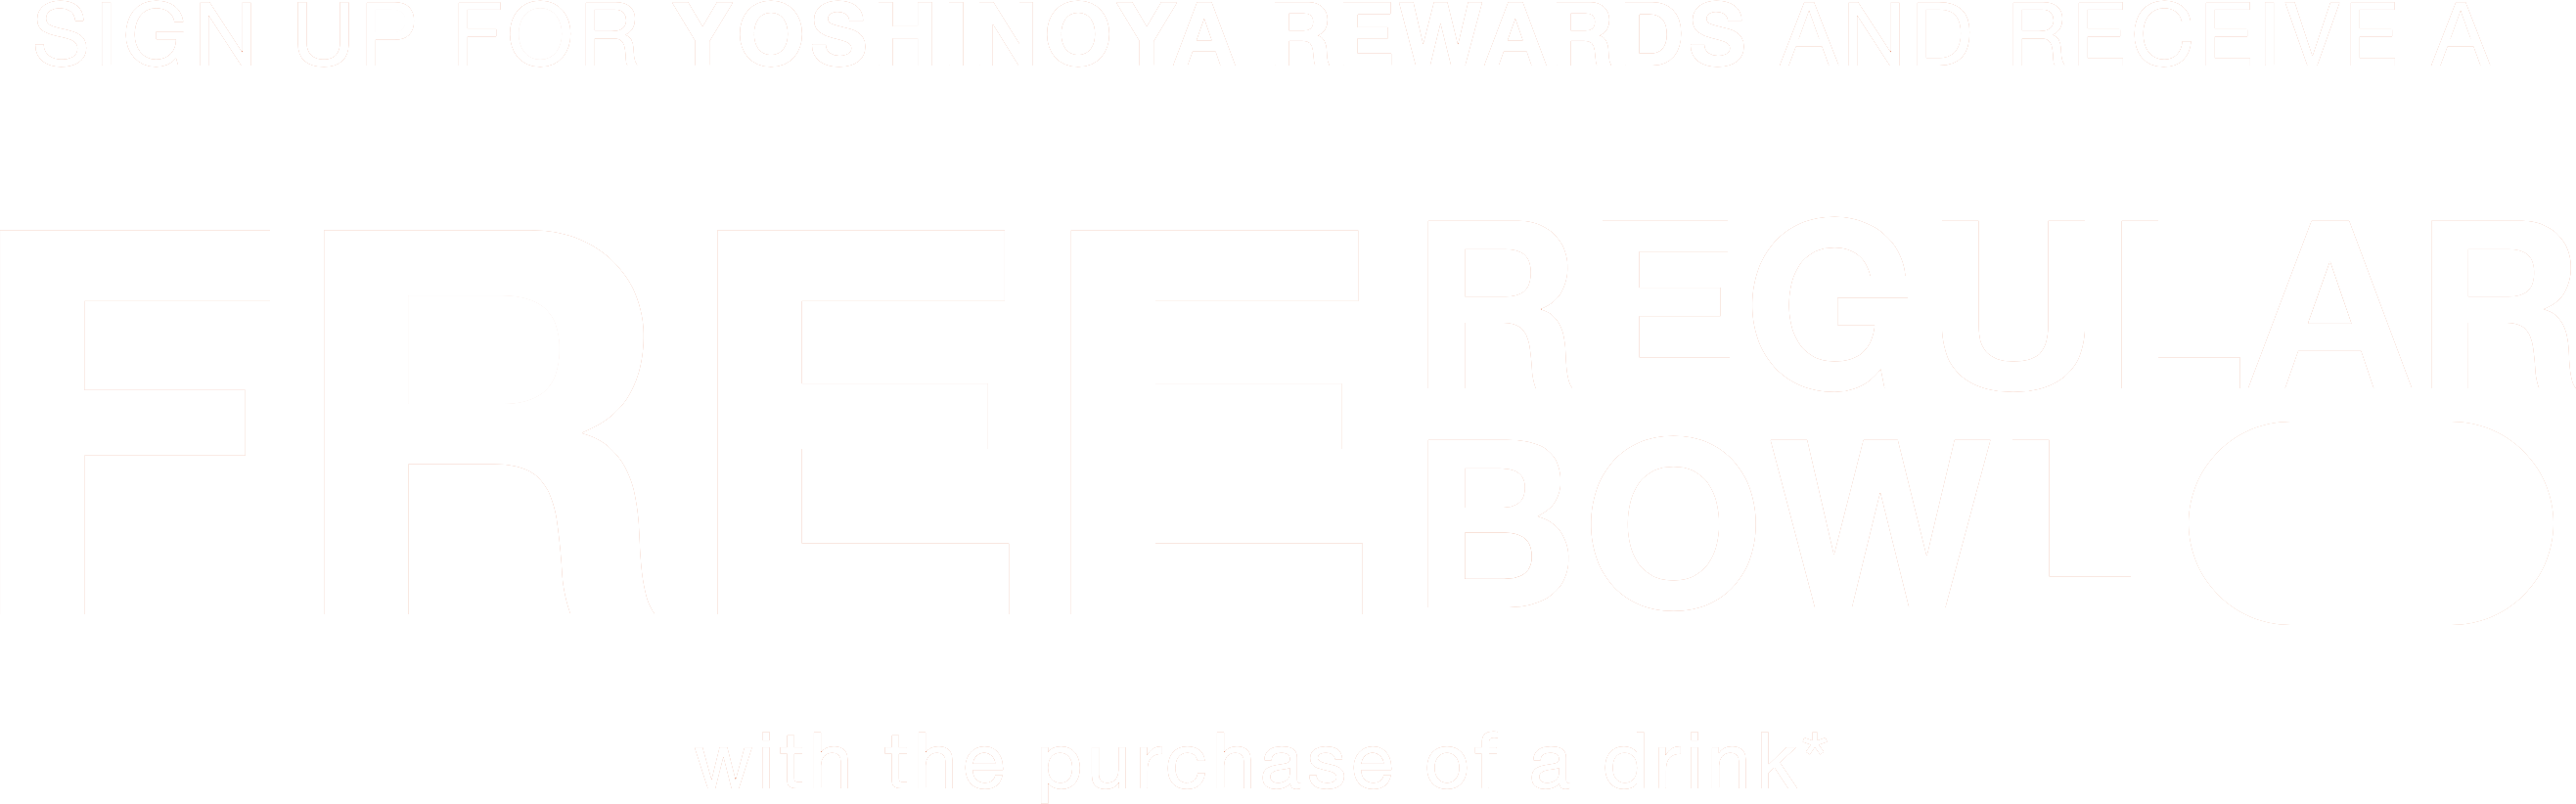 SIGN UP FOR YOSHINOYA REWARDS AND RECEIVE A FREE REGULAR BOWL with the purchase of a drink* Join!